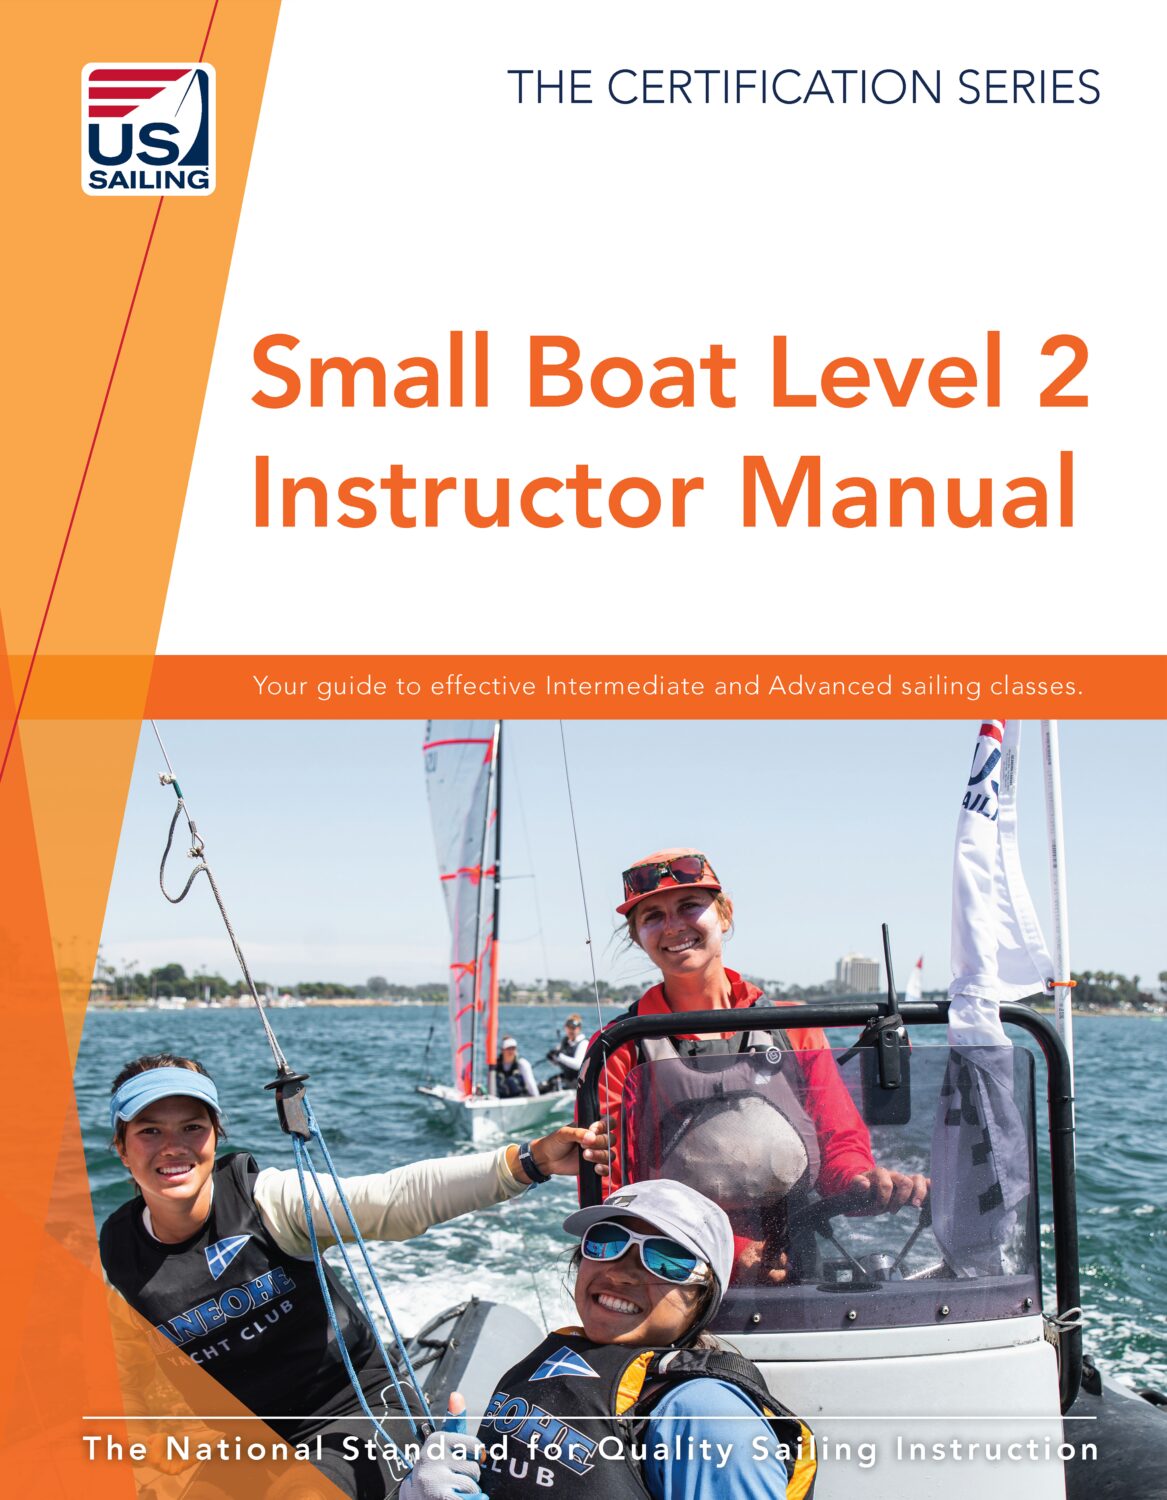 Small Boat Level 2 Instructor Manual